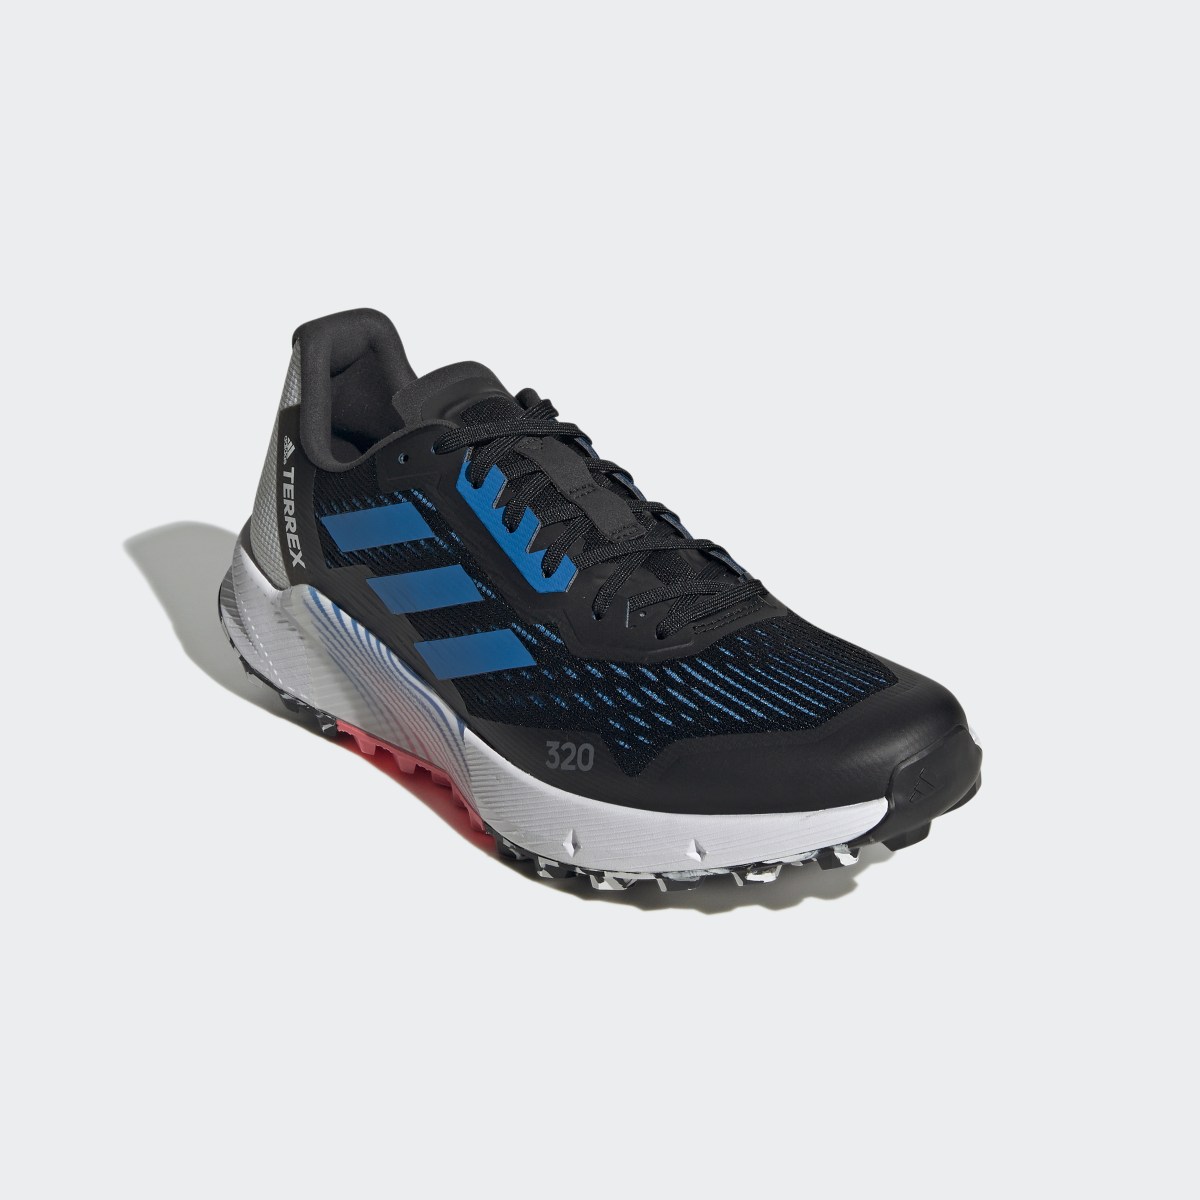 Adidas TERREX AGRAVIC FLOW 2 TRAIL RUNNING SHOES. 5